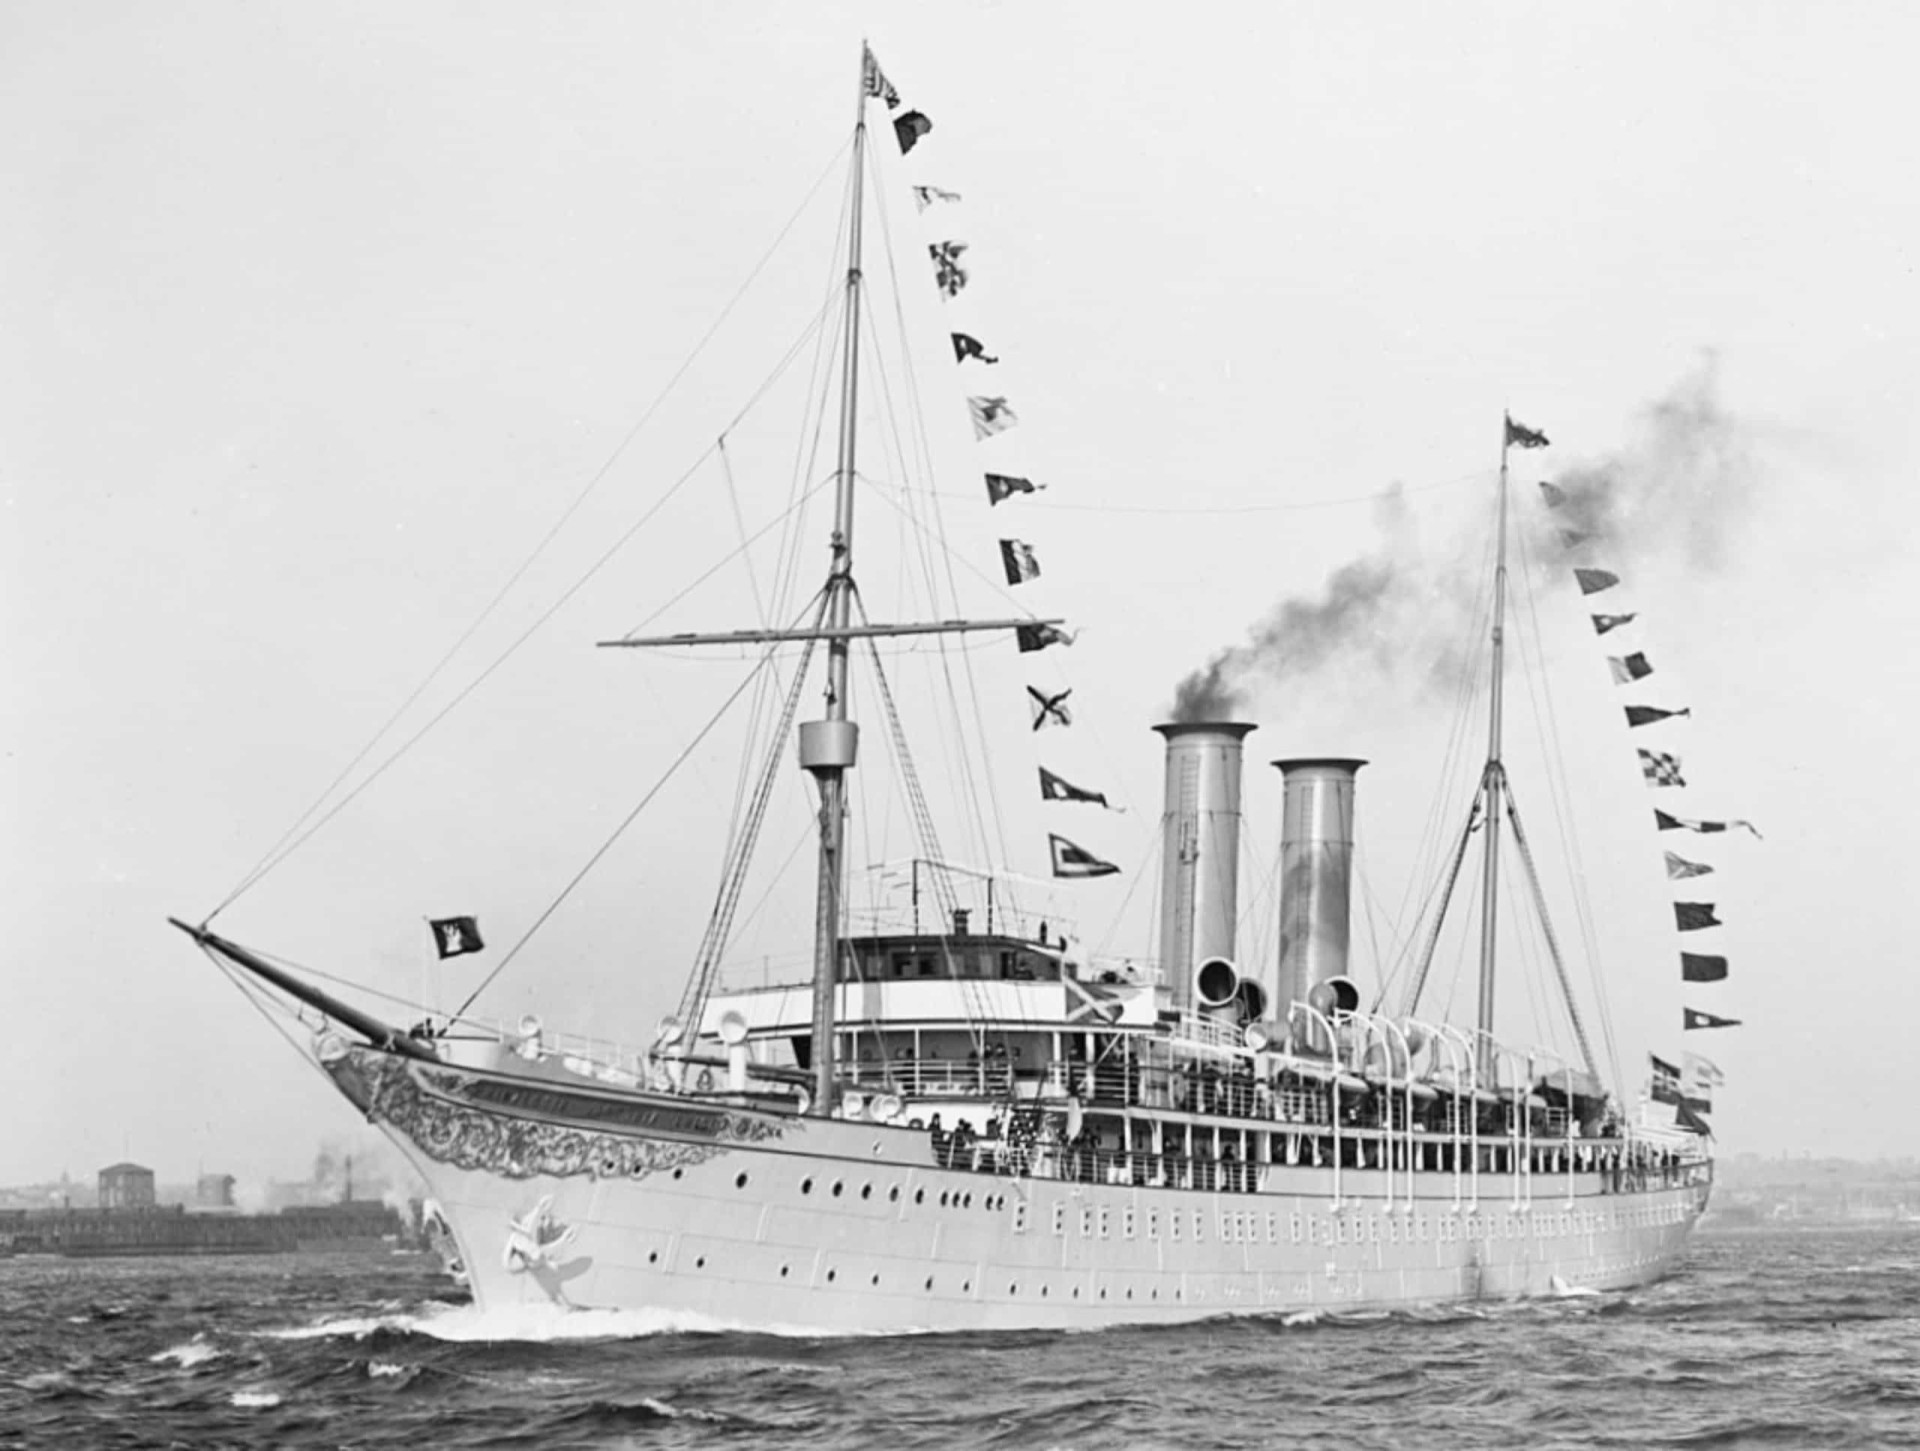 <p><em> Prinzessin Victoria Luise</em> was the first purpose-built, non-private excursion ship, constructed for the Hamburg-America Line (HAPAG). She departed Hamburg on her maiden voyage on January 5, 1901, bound for the West Indies via New York.</p>